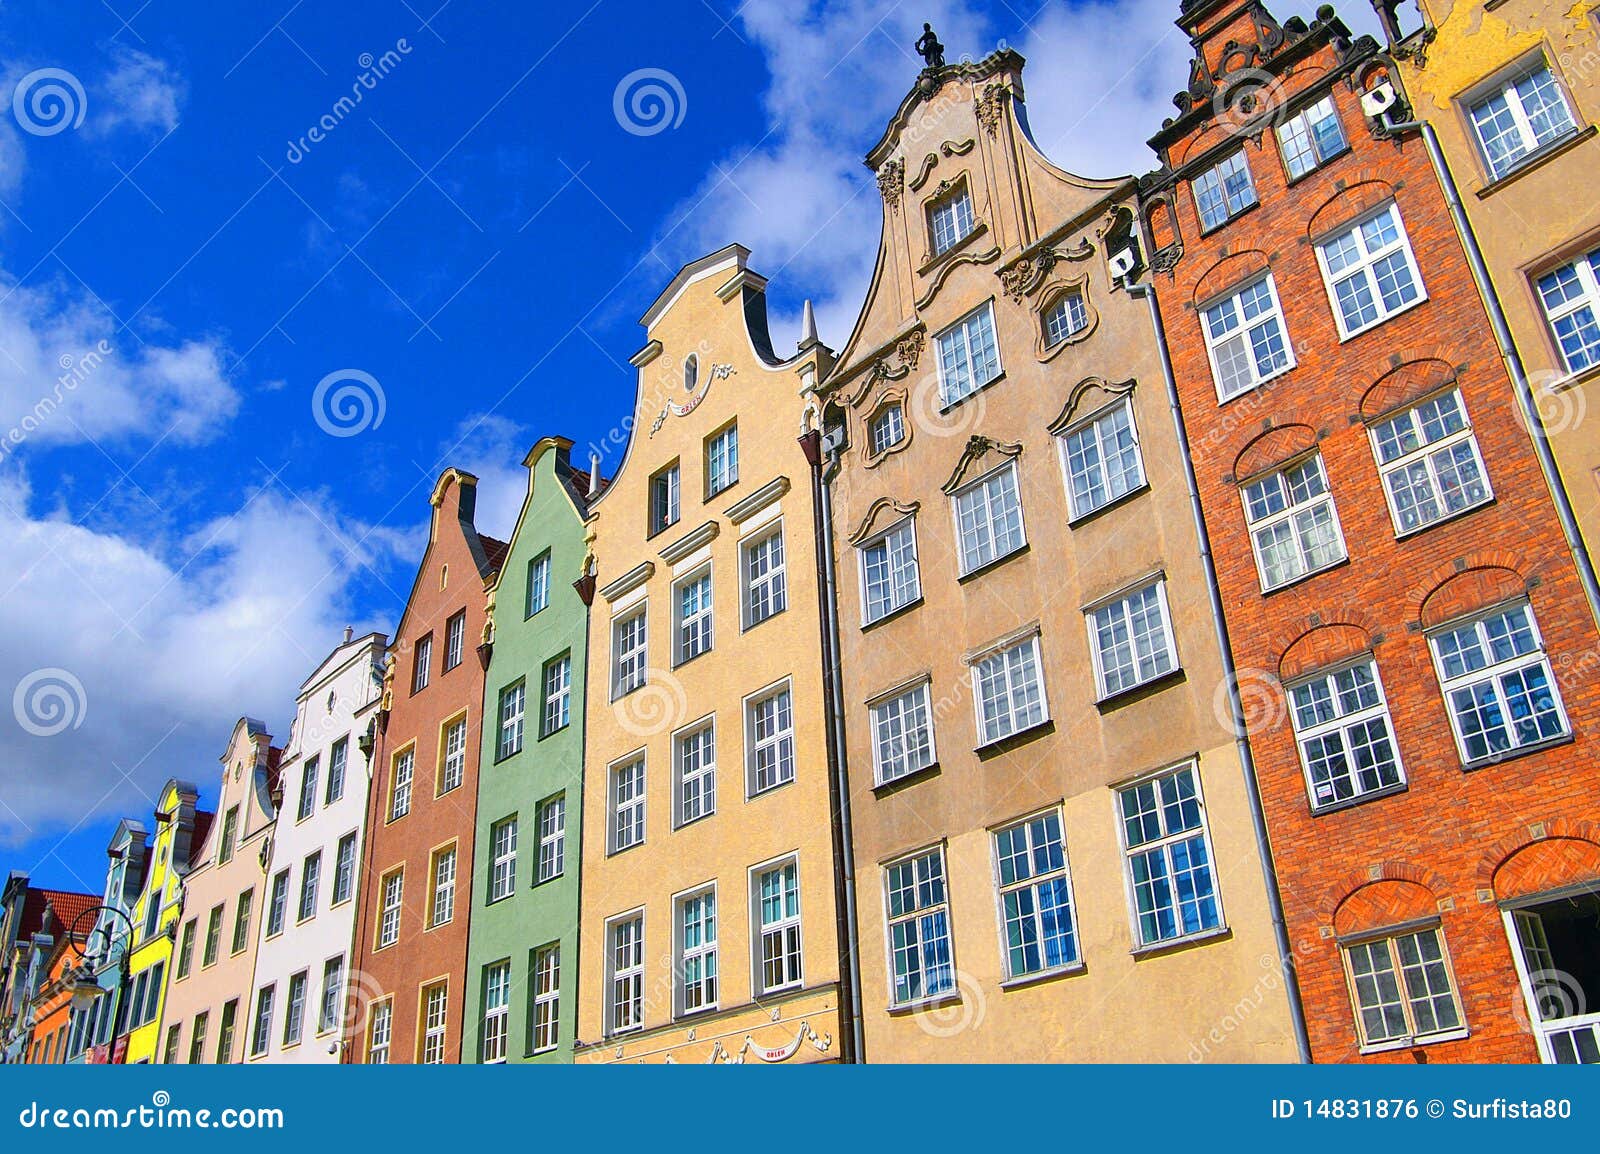 old town of gdansk city, poland